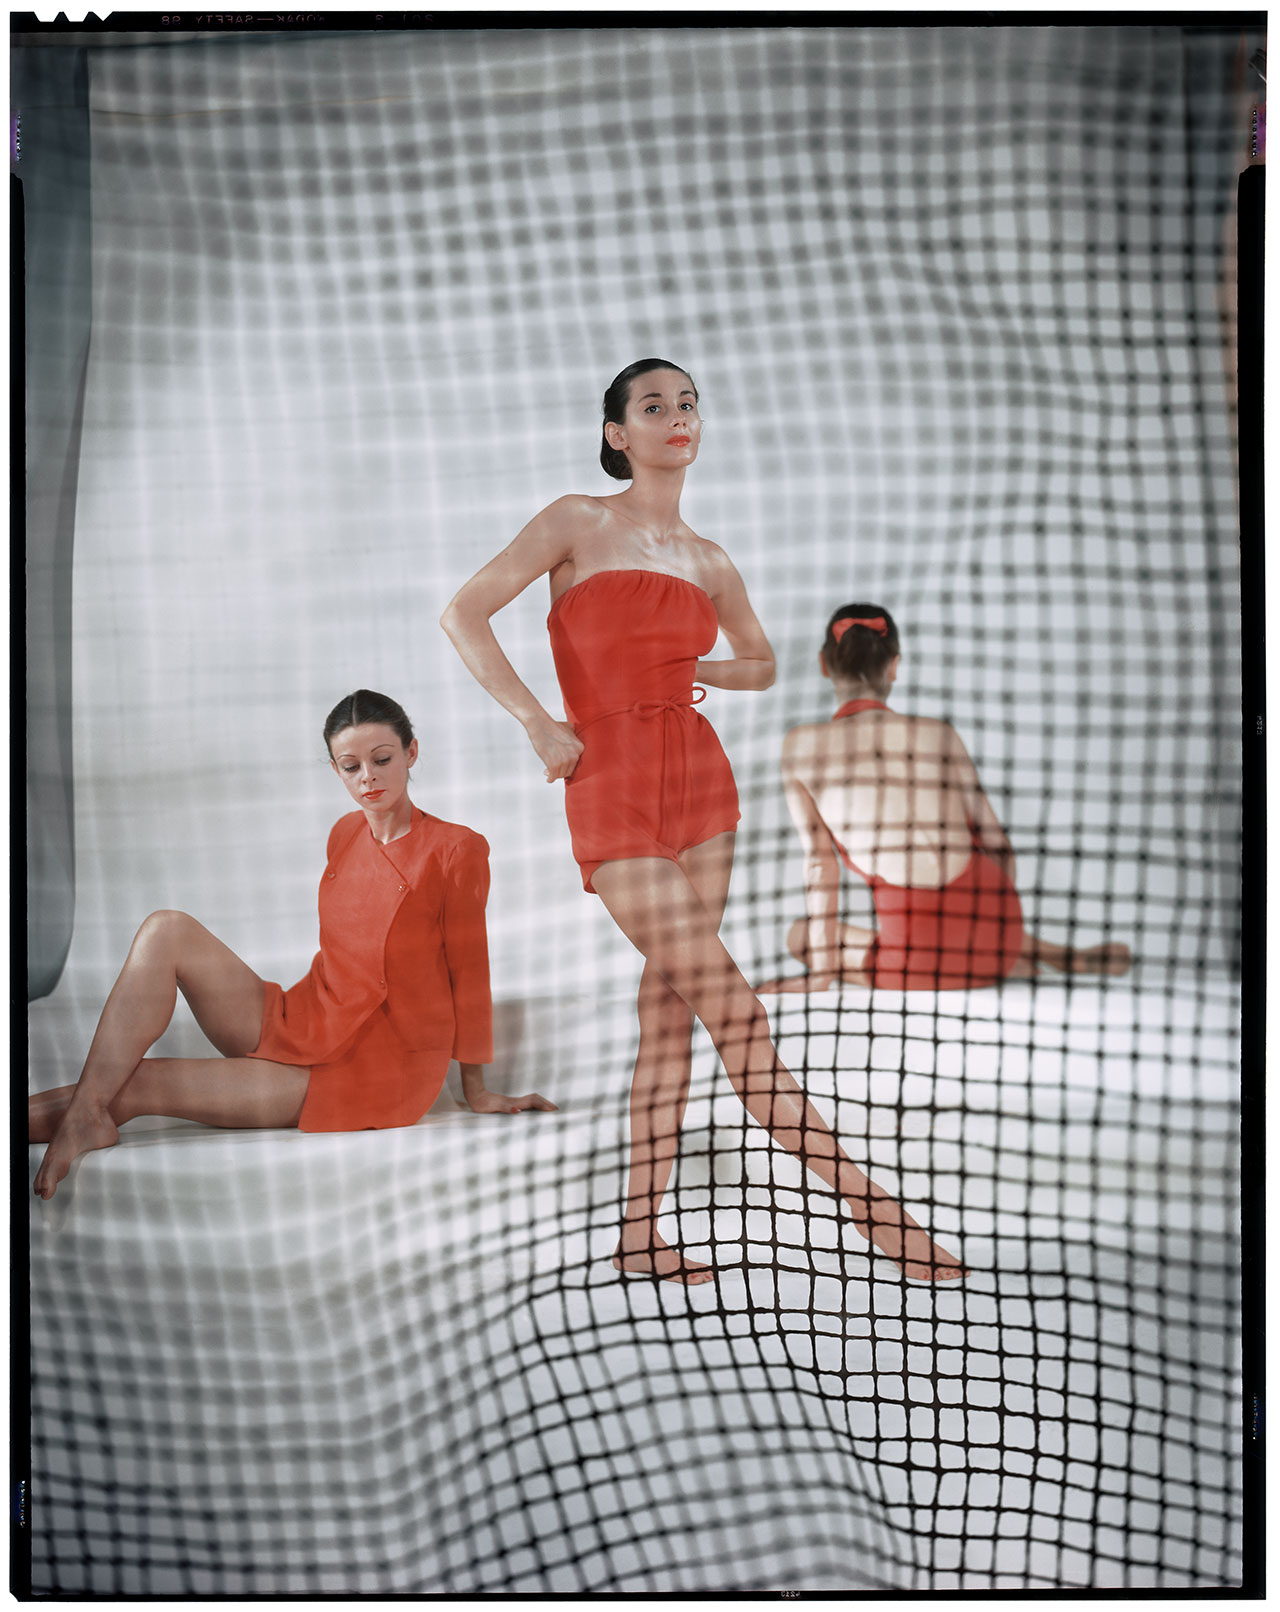 Variant of the photograph published in Vogue US, May 1946 © The Estate of Erwin Blumenfeld.